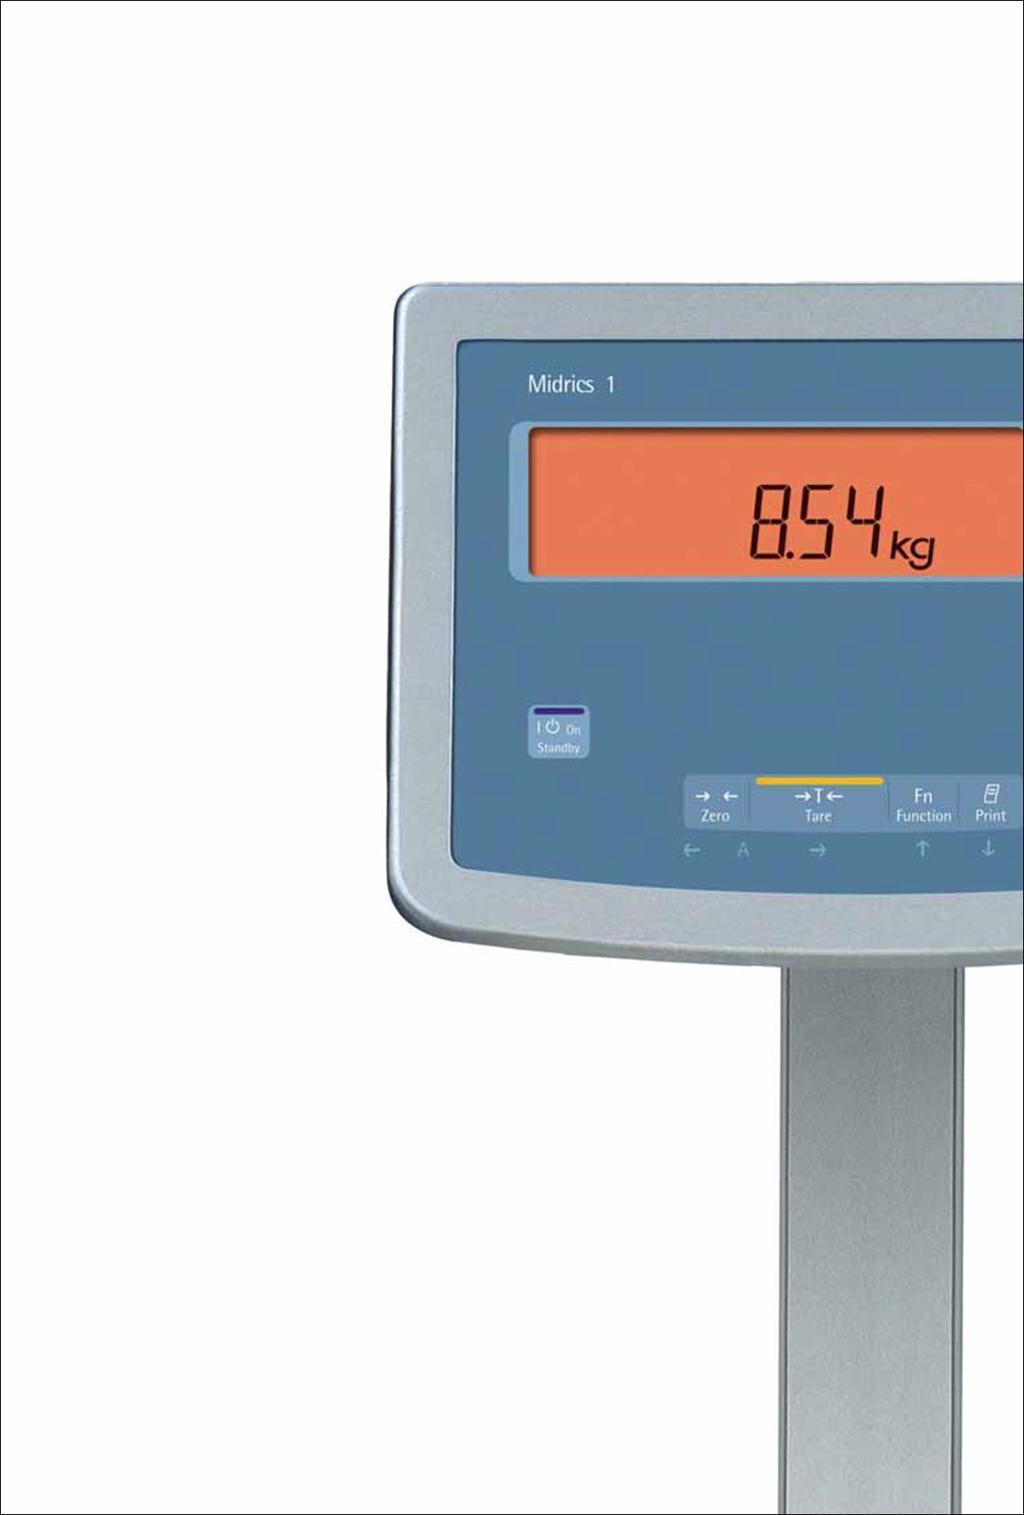 Platform Scales PRECISION WEIGHING FOR ALL INDUSTRIES Large display, logical buttons simplifies weighing operations.